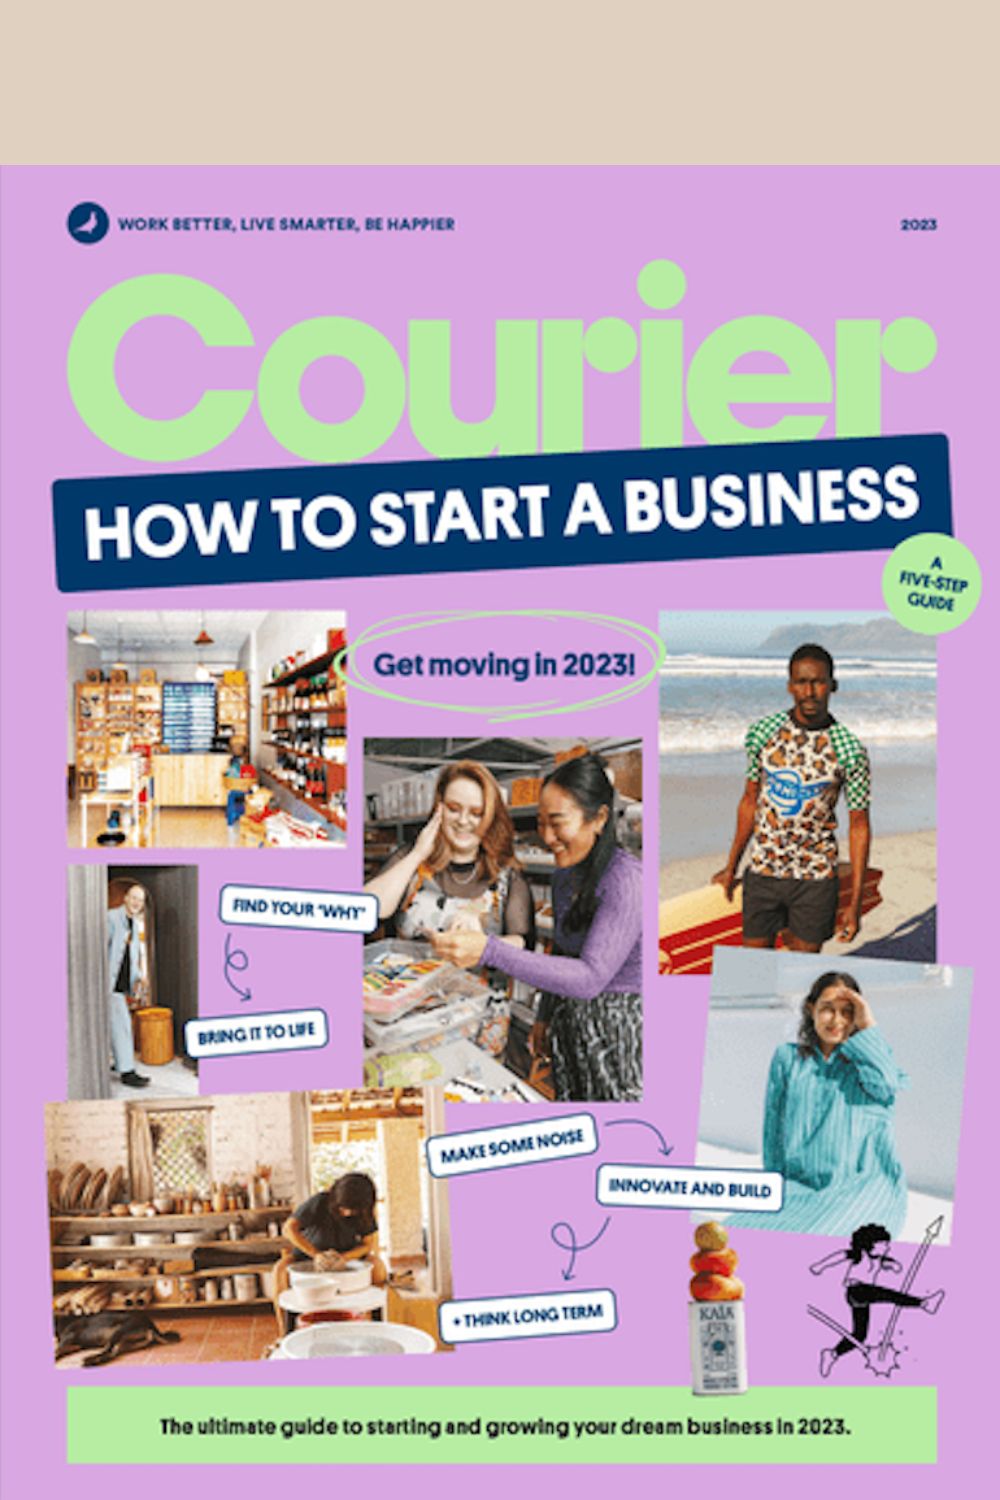 Courier Magazine - How To Start A Business 2023